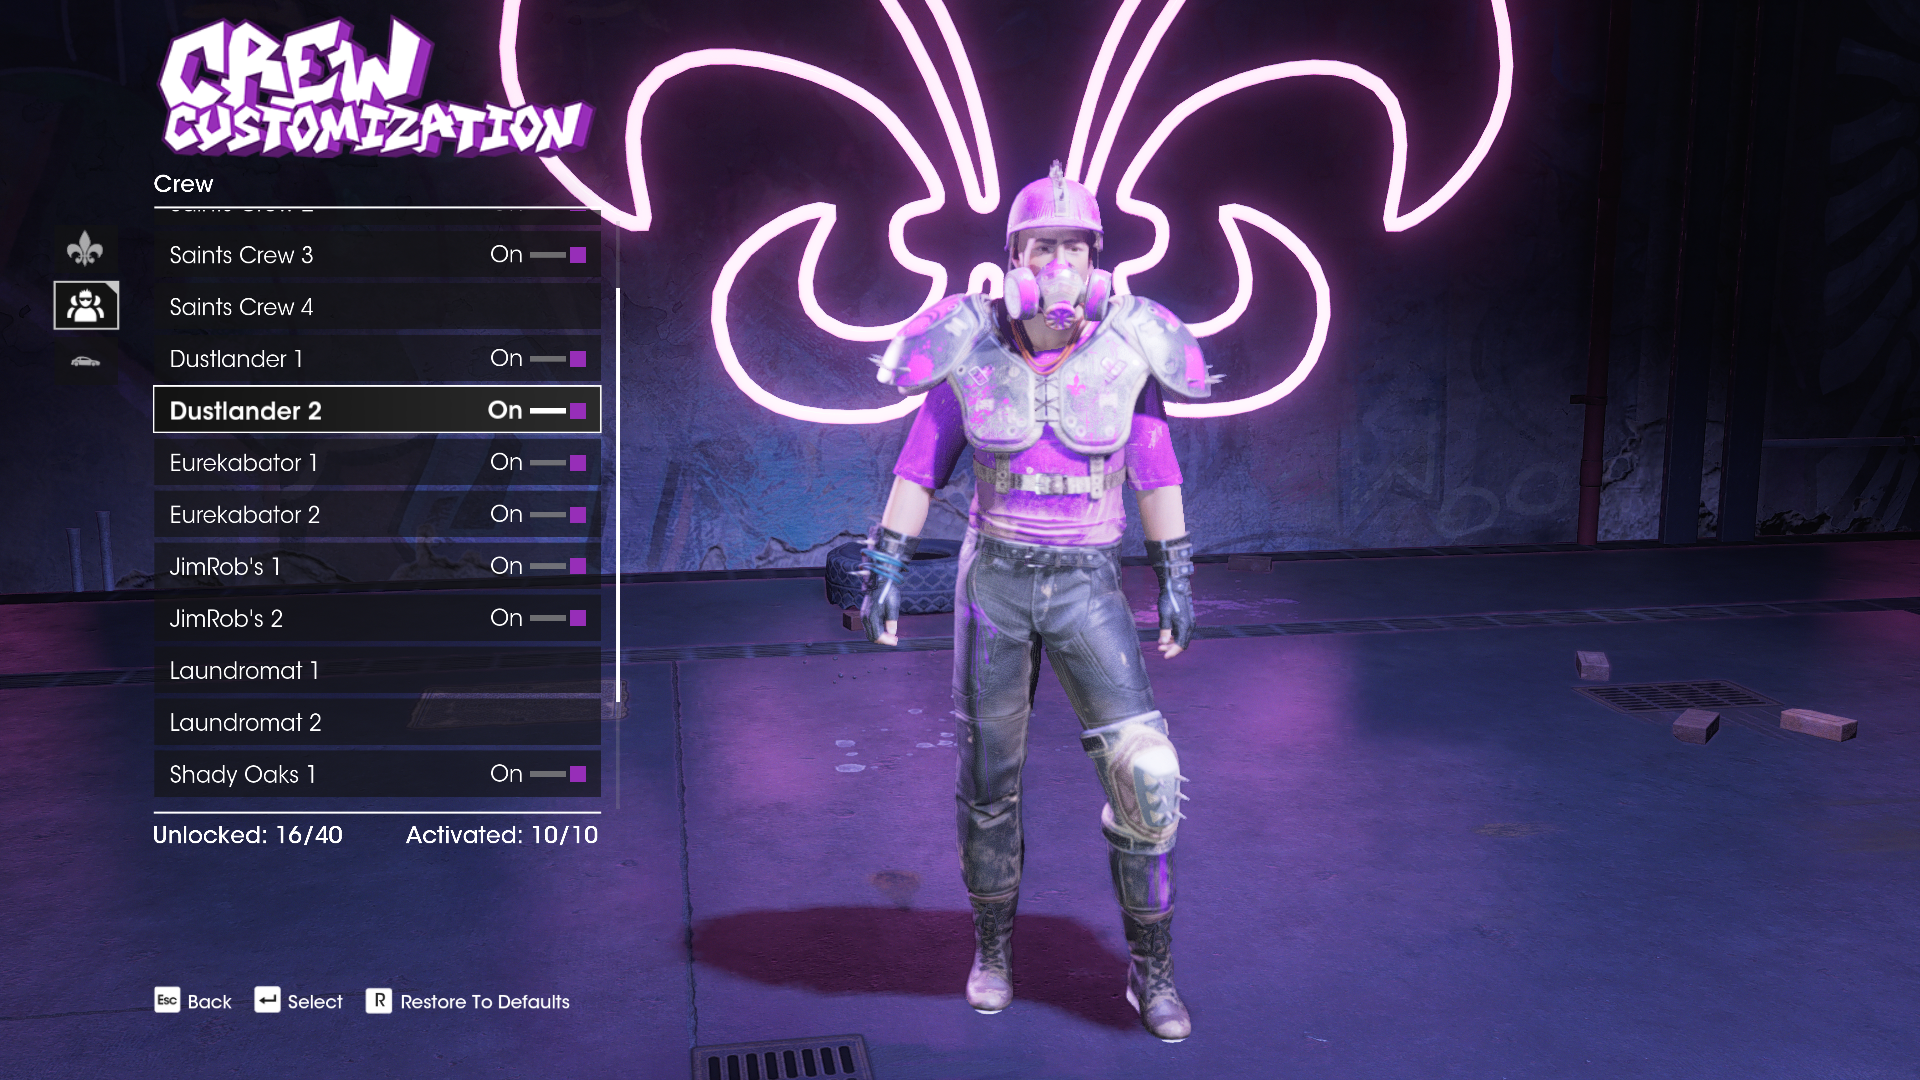 Saints Row returns in 2022 with a new crew in the American Southwest